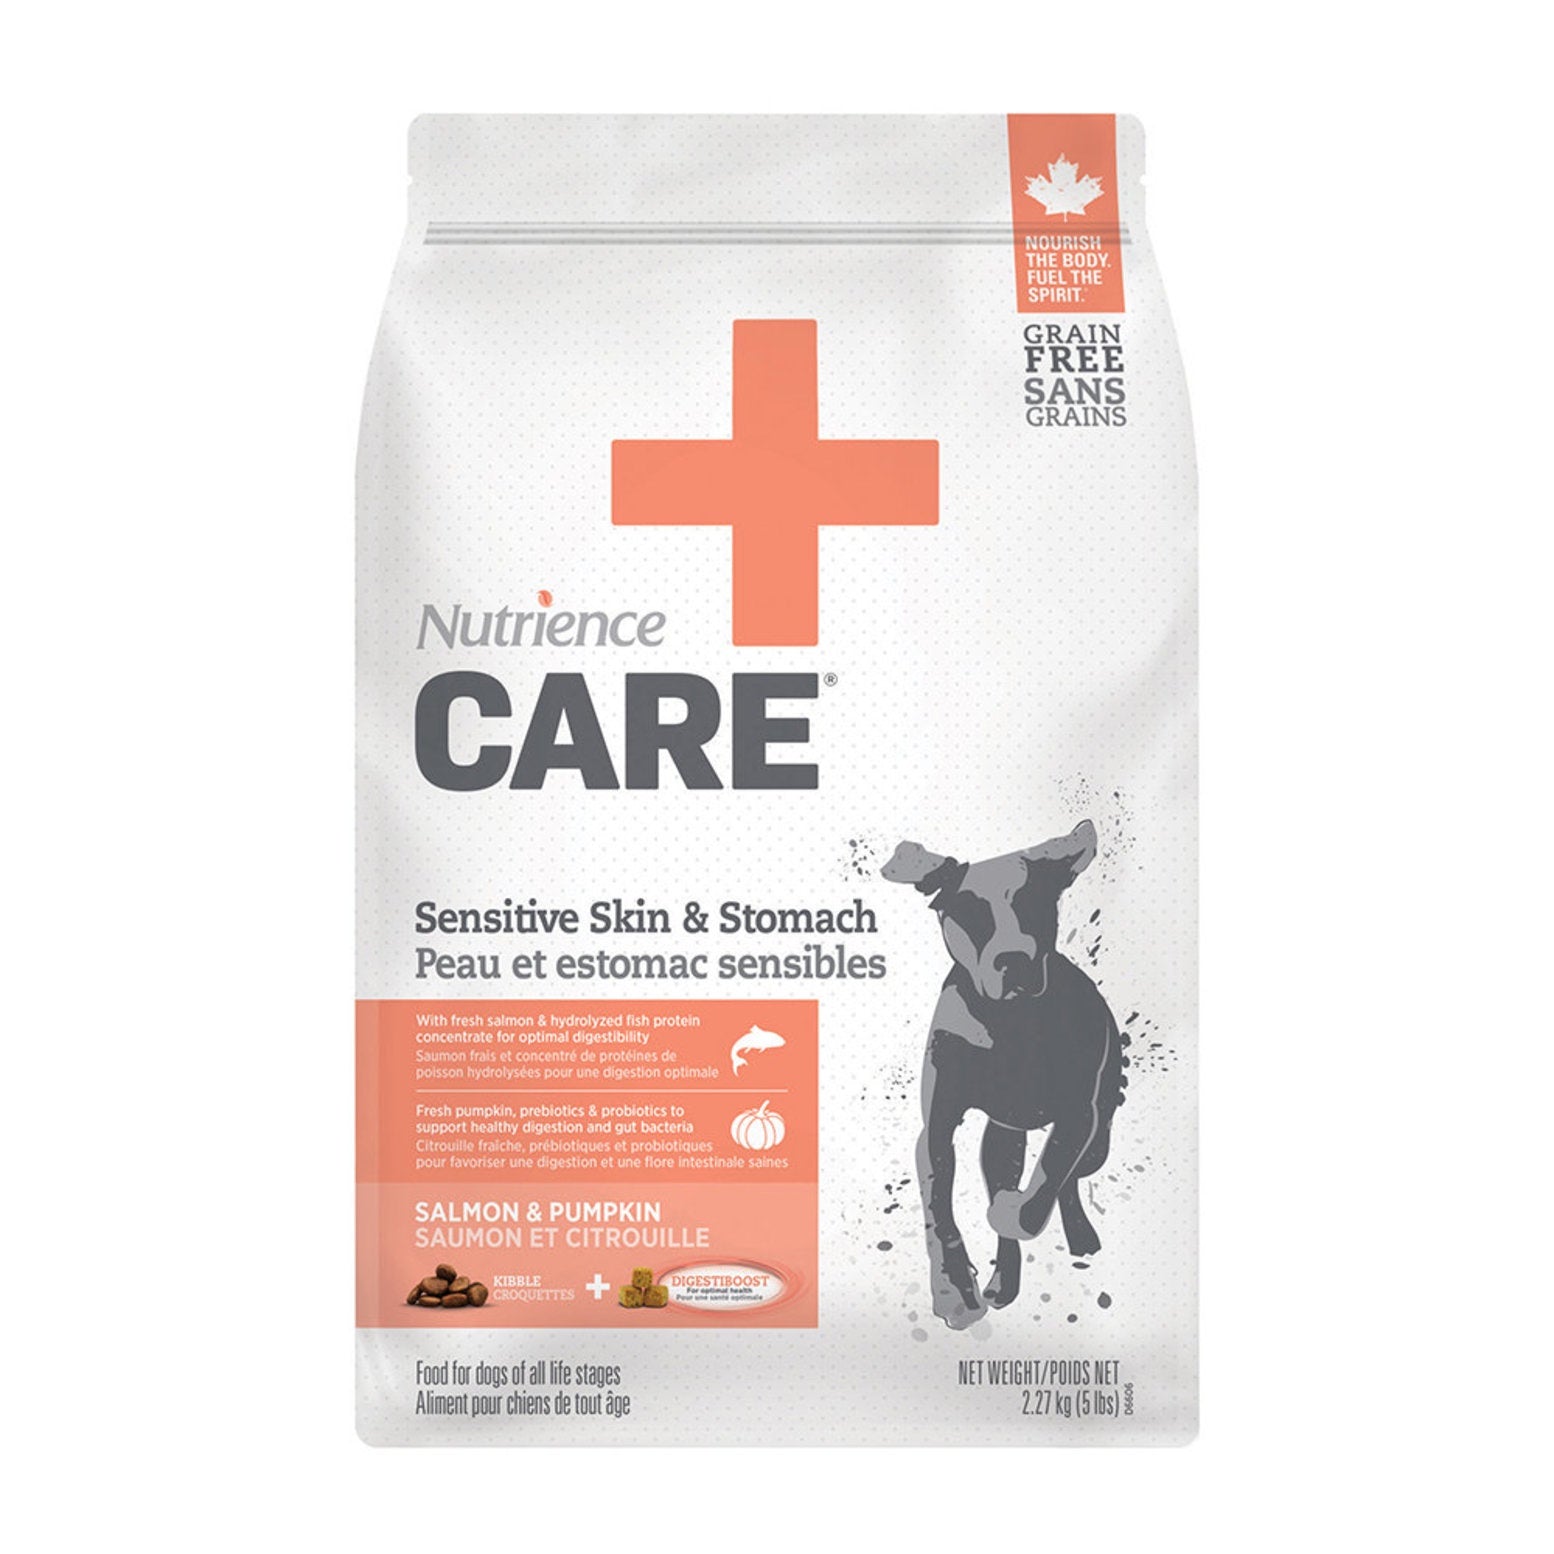 Nutrience Biscuits Nutrience CARE Sensitive Skin & Stomach Dog Food 2.27kg